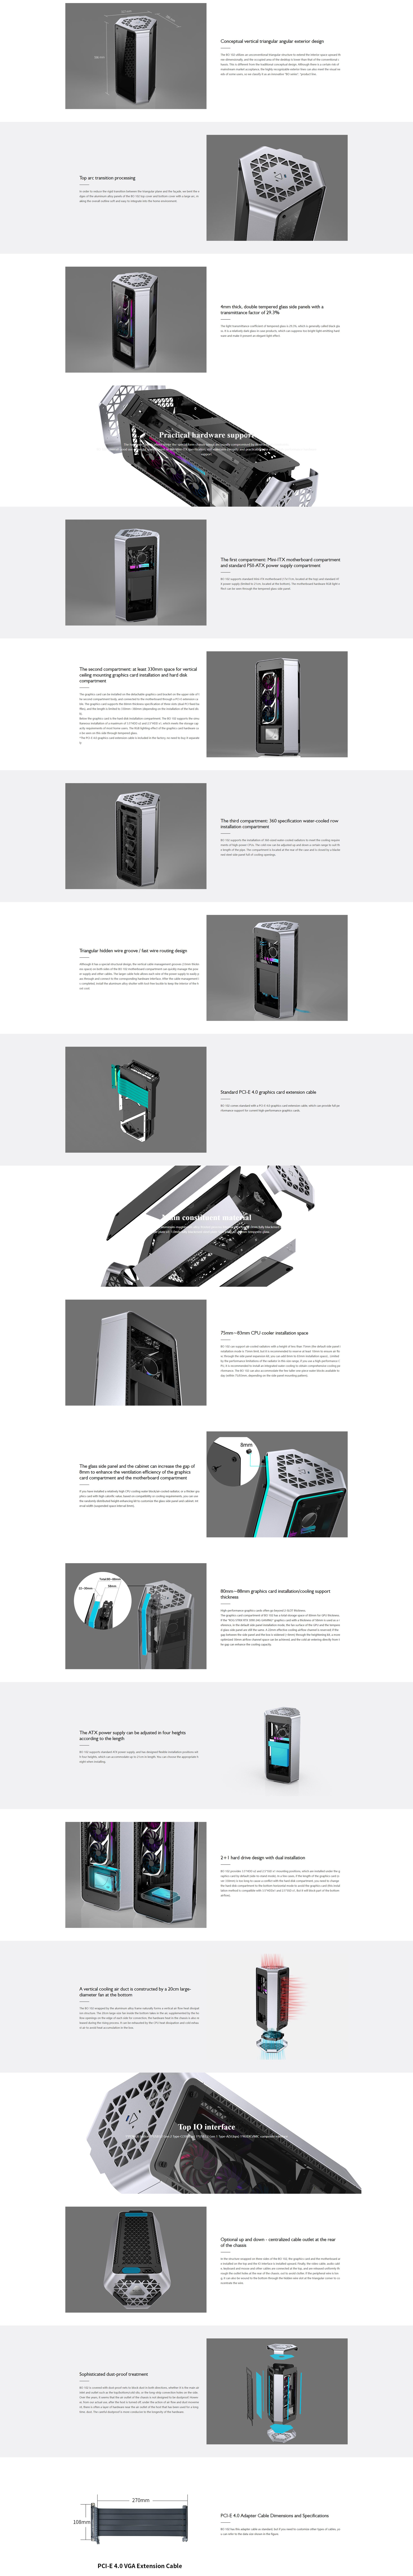 A large marketing image providing additional information about the product Jonsplus BO 102 Silver Mini ITX Case w/Tempered Glass Side Panel - Additional alt info not provided